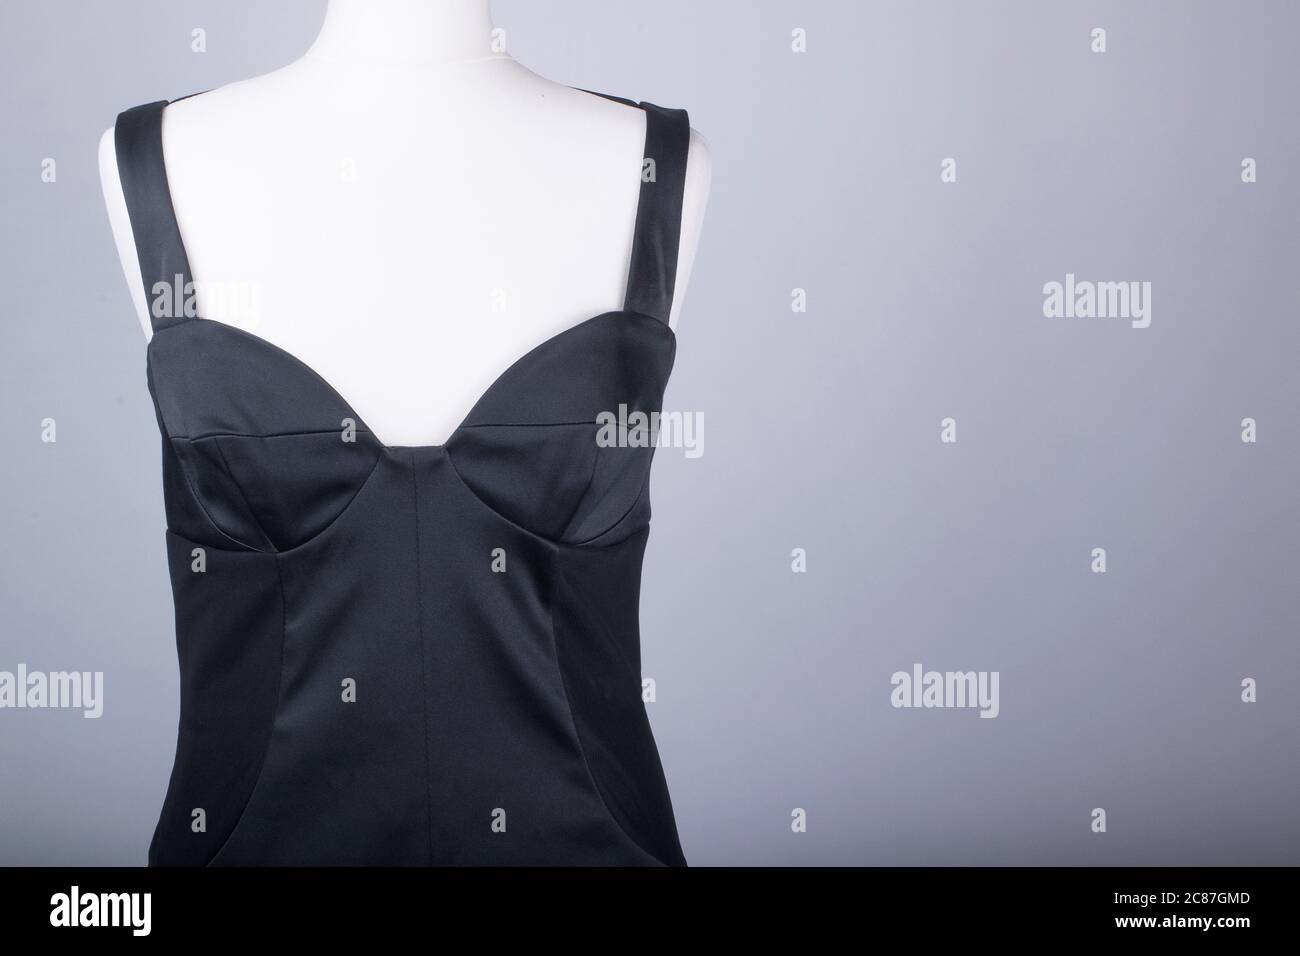 A Tailors Mannequin dressed in a Black Satin Dress Stock Photo